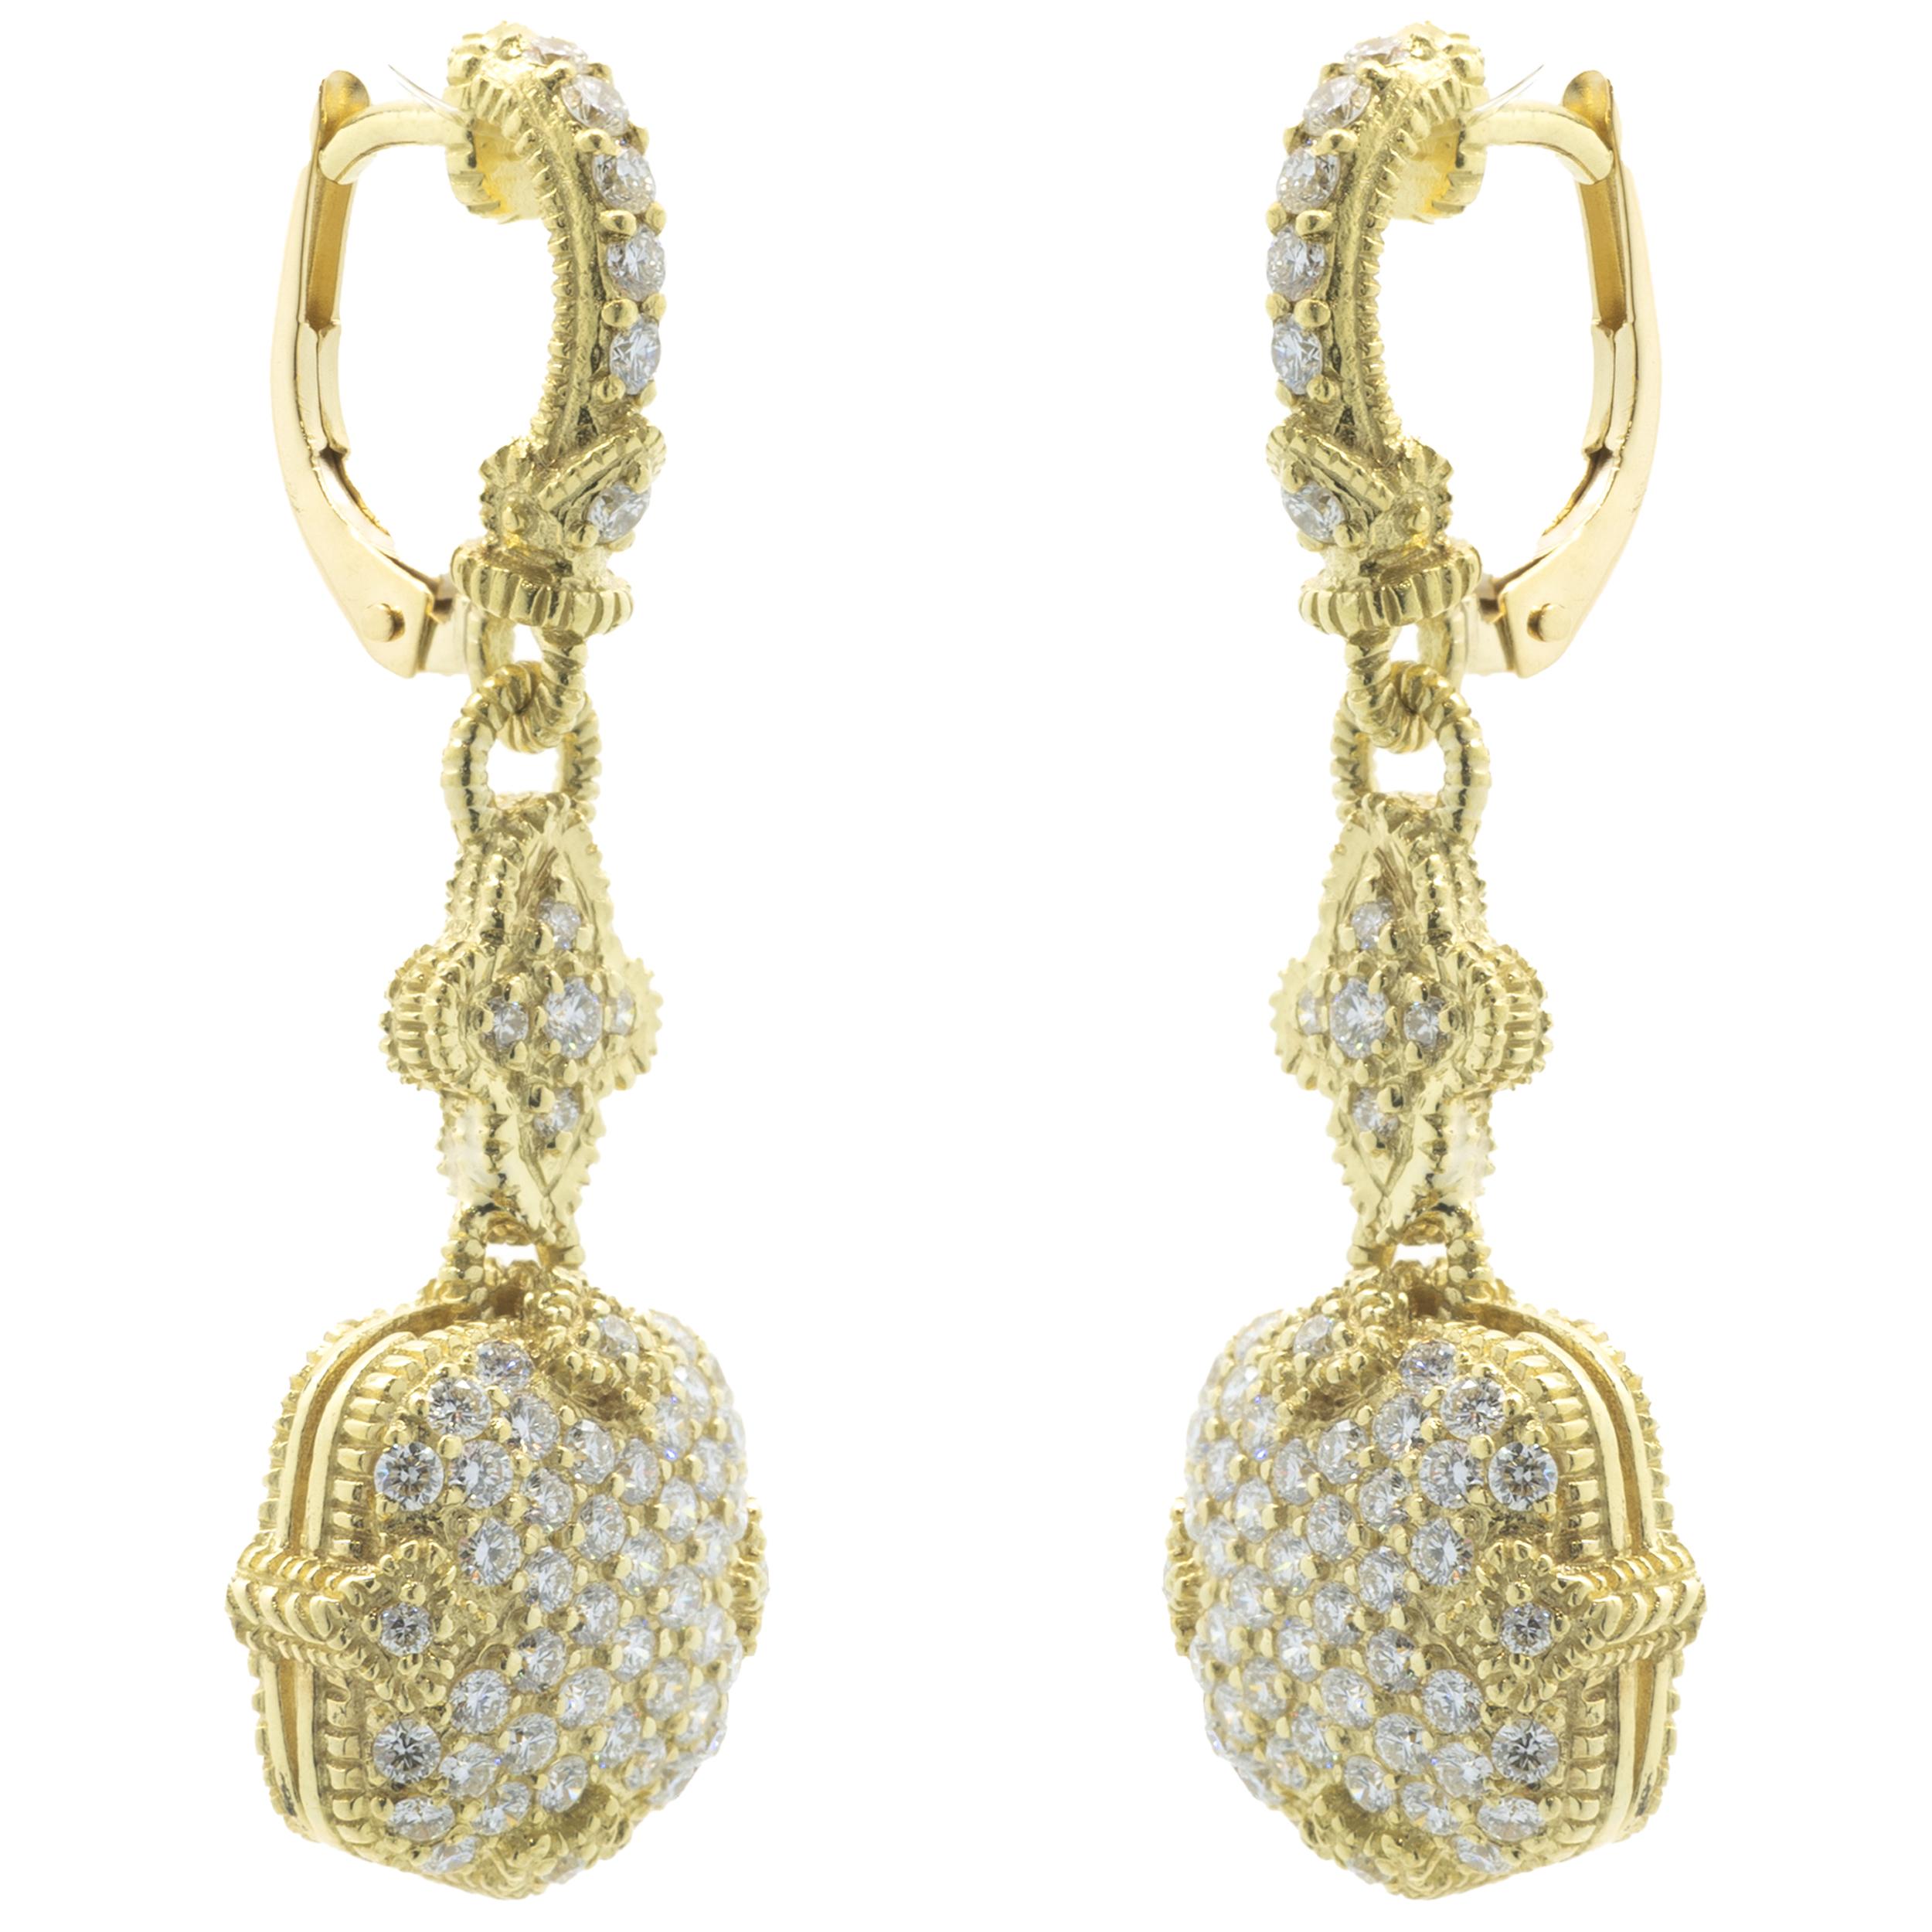 Designer: Judith Ripka
Material: 18K yellow gold
Diamond: 122 round brilliant cut = .61cttw
Color: G
Clarity: VS1
Dimensions: earrings measure 35 X 13mm
Weight: 8.89 grams
